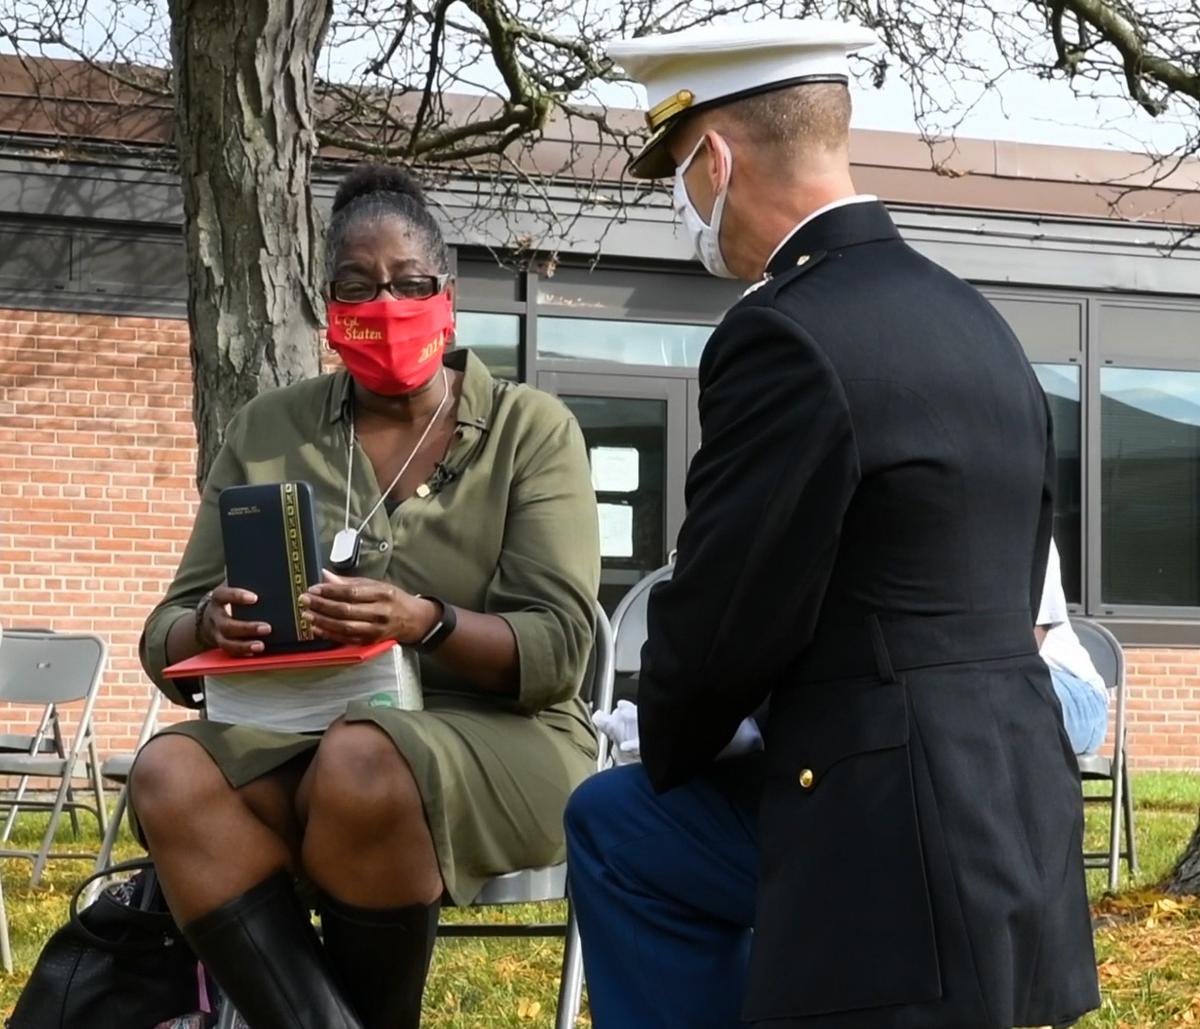 A U.S. Marine Corps Major with 4th Combat Engineer Battalion presents Lance Cpl. Corey Staten’s mother, Nancy Staten, the Navy and Marine Corps Medal during an award ceremony in Baltimore, Oct. 24, 2020. (<a href="https://www.dvidshub.net/image/6406896/lance-cpl-corey-statens-award-ceremony">Lance Cpl. Dylon Grasso</a>/U.S. Marine Corps)